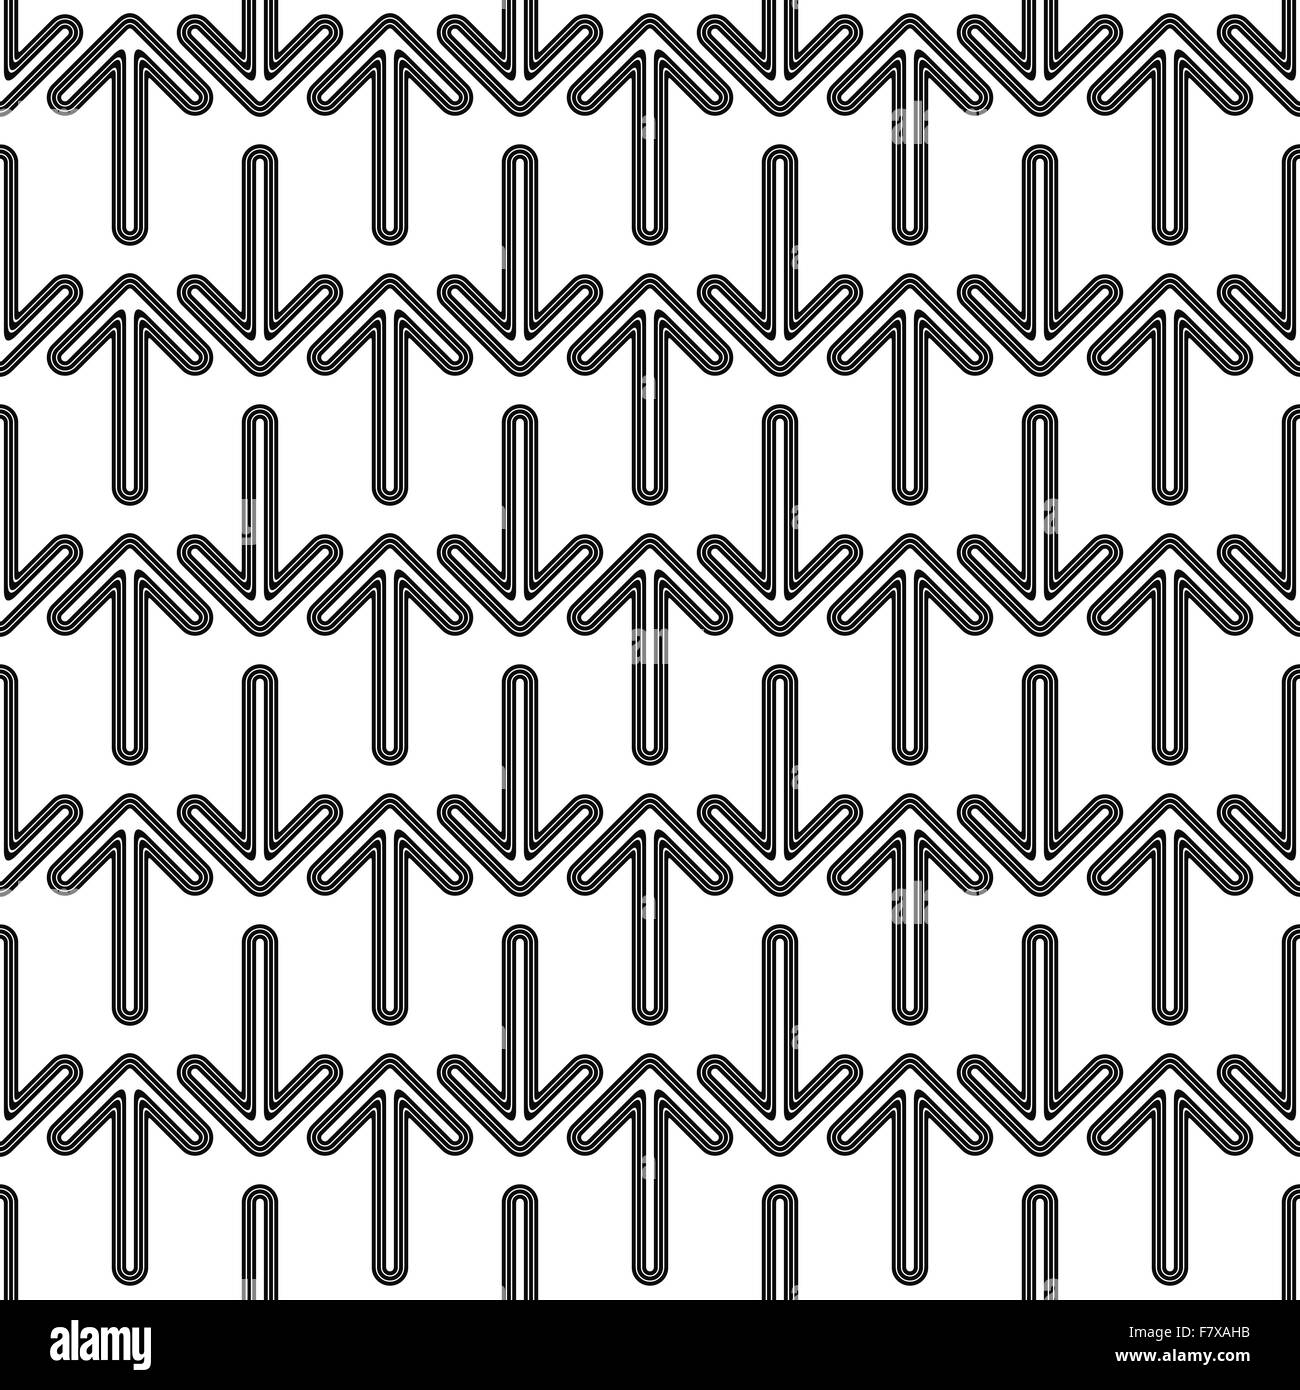 Seamless black and white arrow pattern Stock Vector